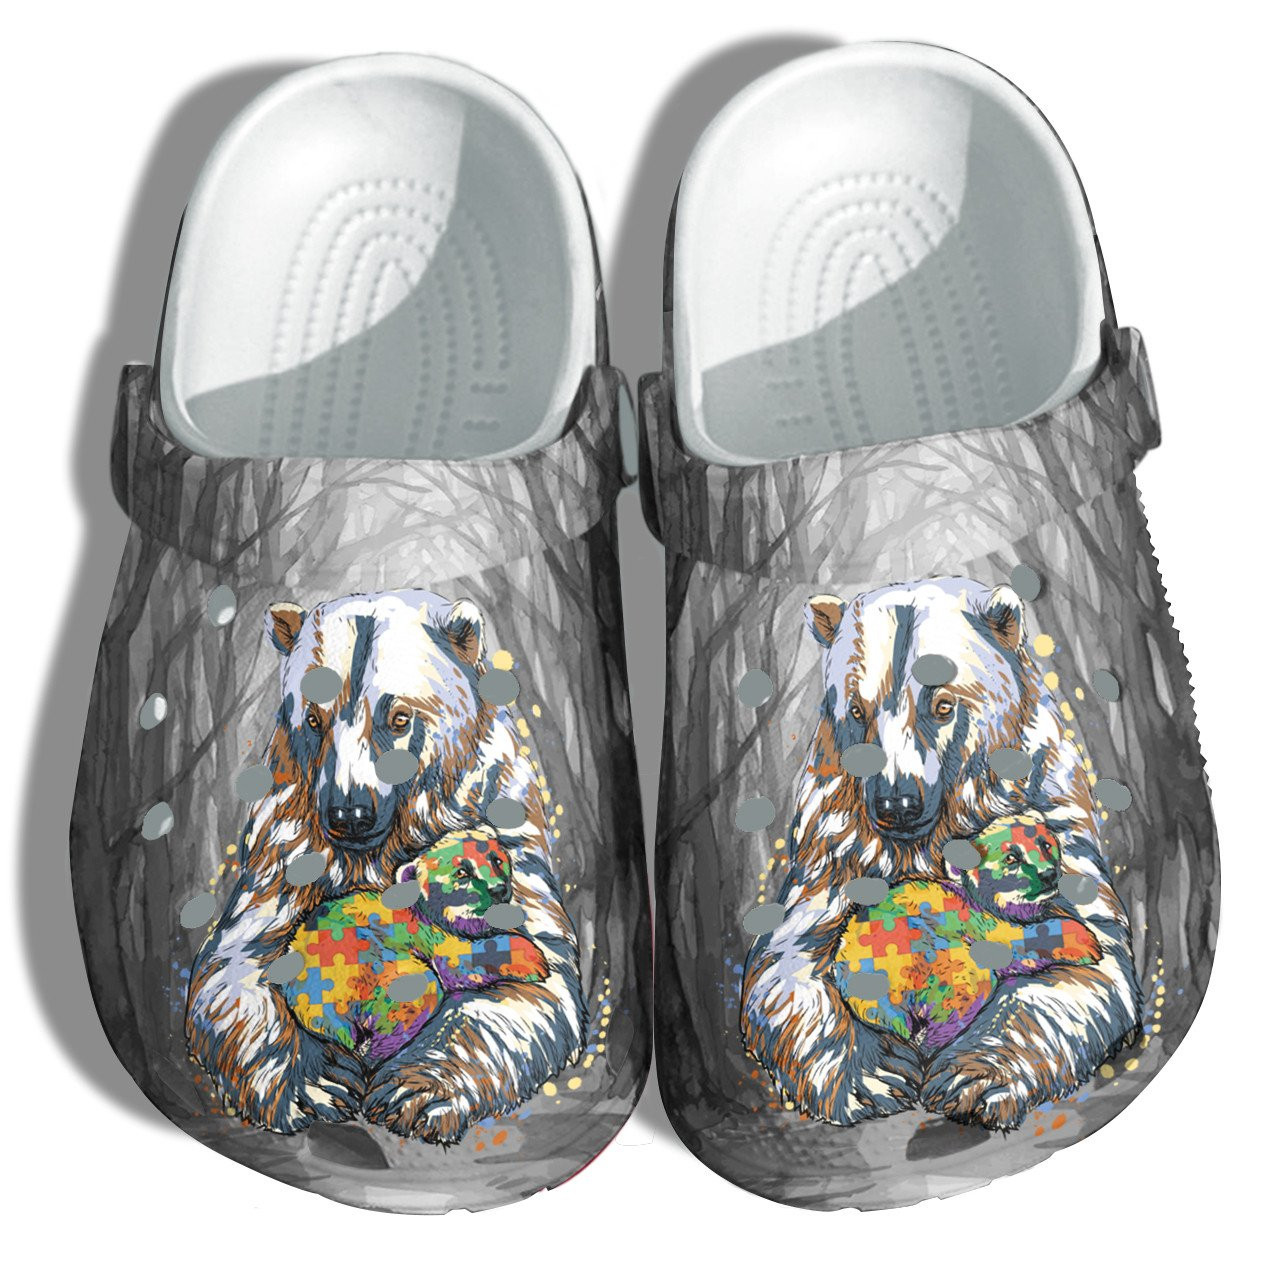 Bear And Baby Autism Awareness Crocs Clogs Shoes Gifts For Birthday Christmas